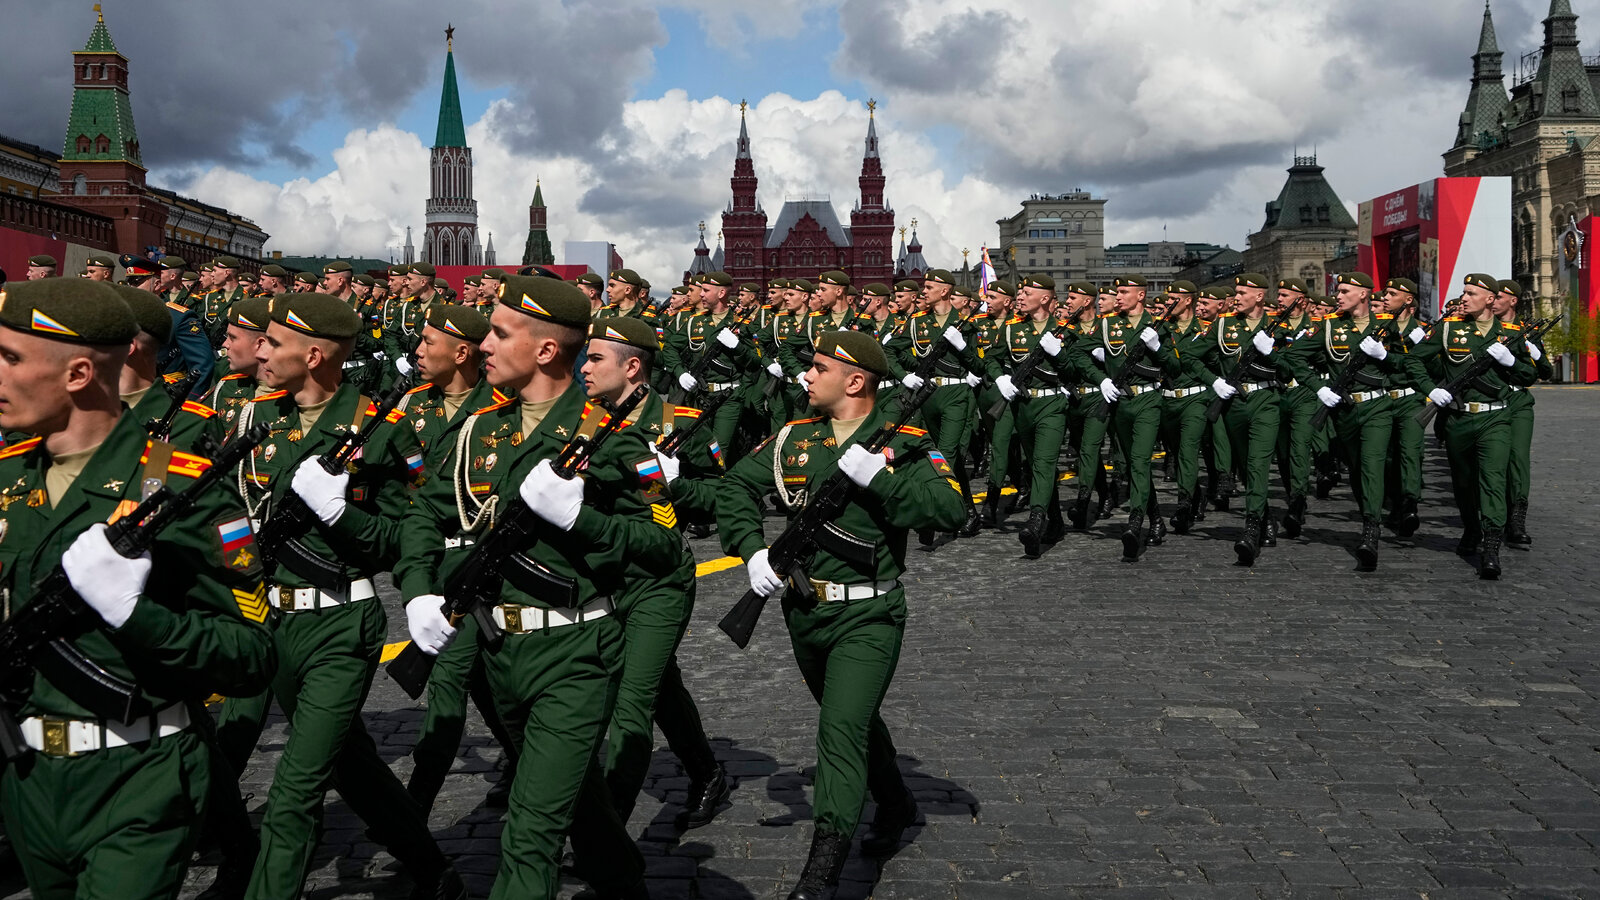 In Photos Russia Celebrates Victory Day Holiday With Parade